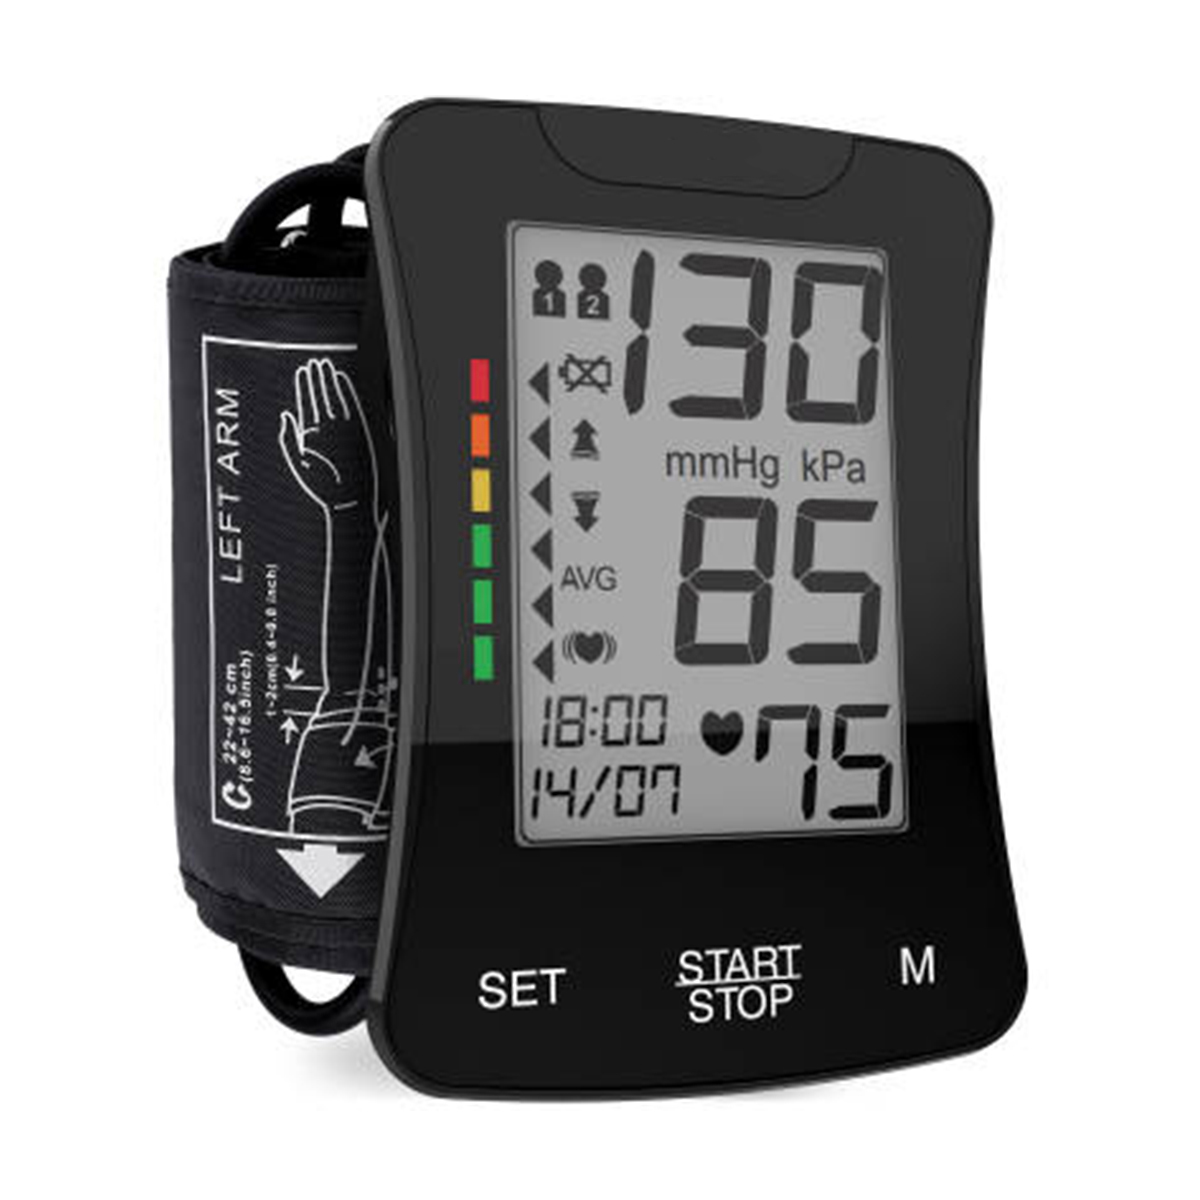 Arm-type Fully Automatic Digital Blood Pressure Monitor leh Thusawi theihna